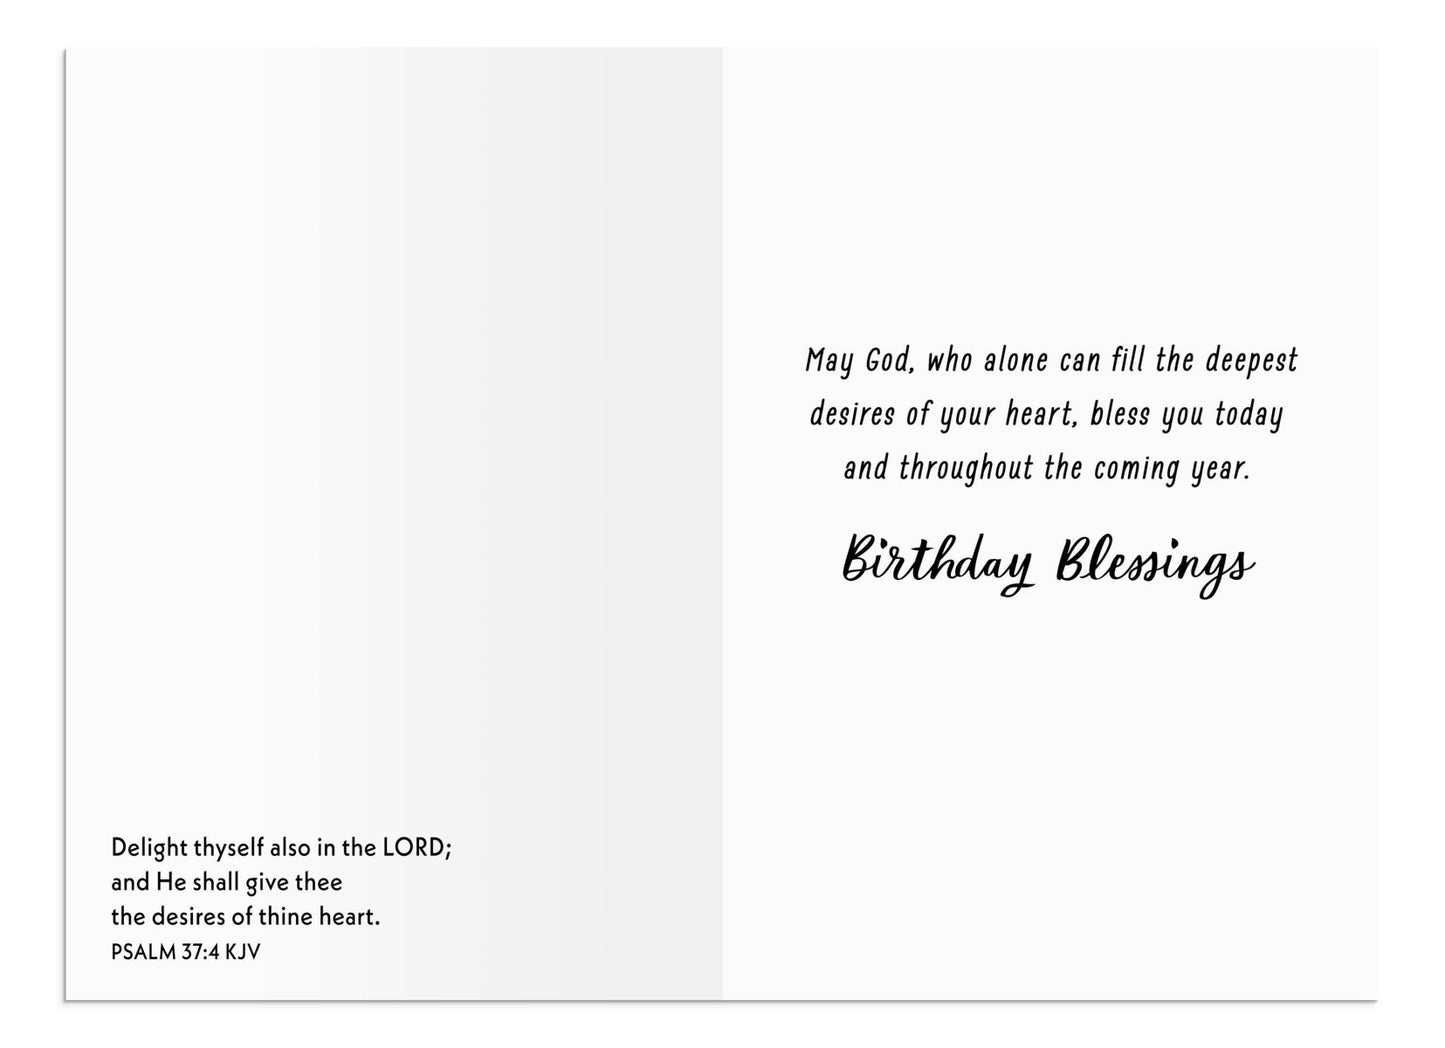 Roy Lessin - Happy Birthday - 12 Boxed Cards - The Christian Gift Company